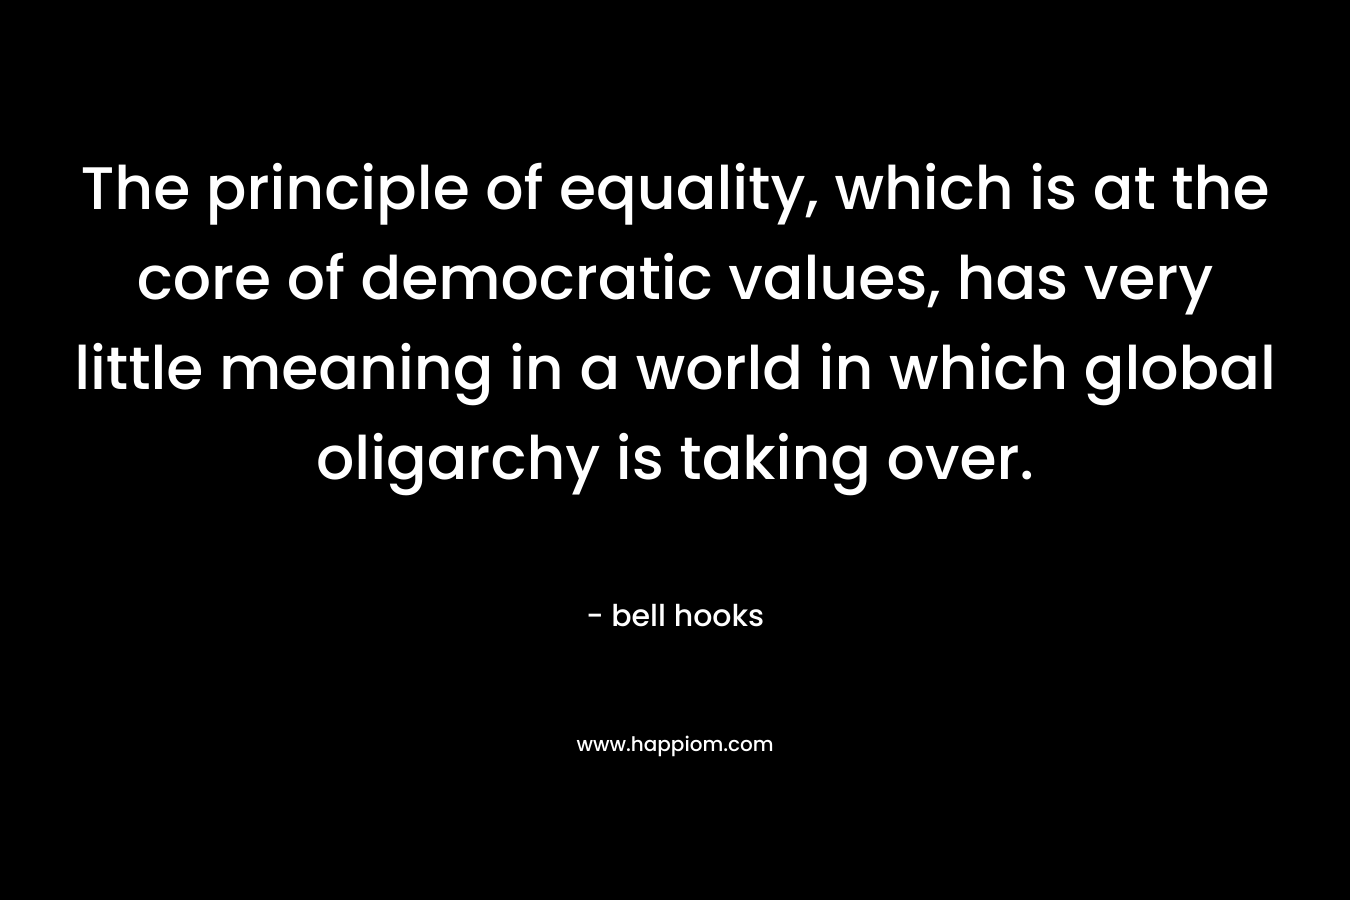 The principle of equality, which is at the core of democratic values, has very little meaning in a world in which global oligarchy is taking over.